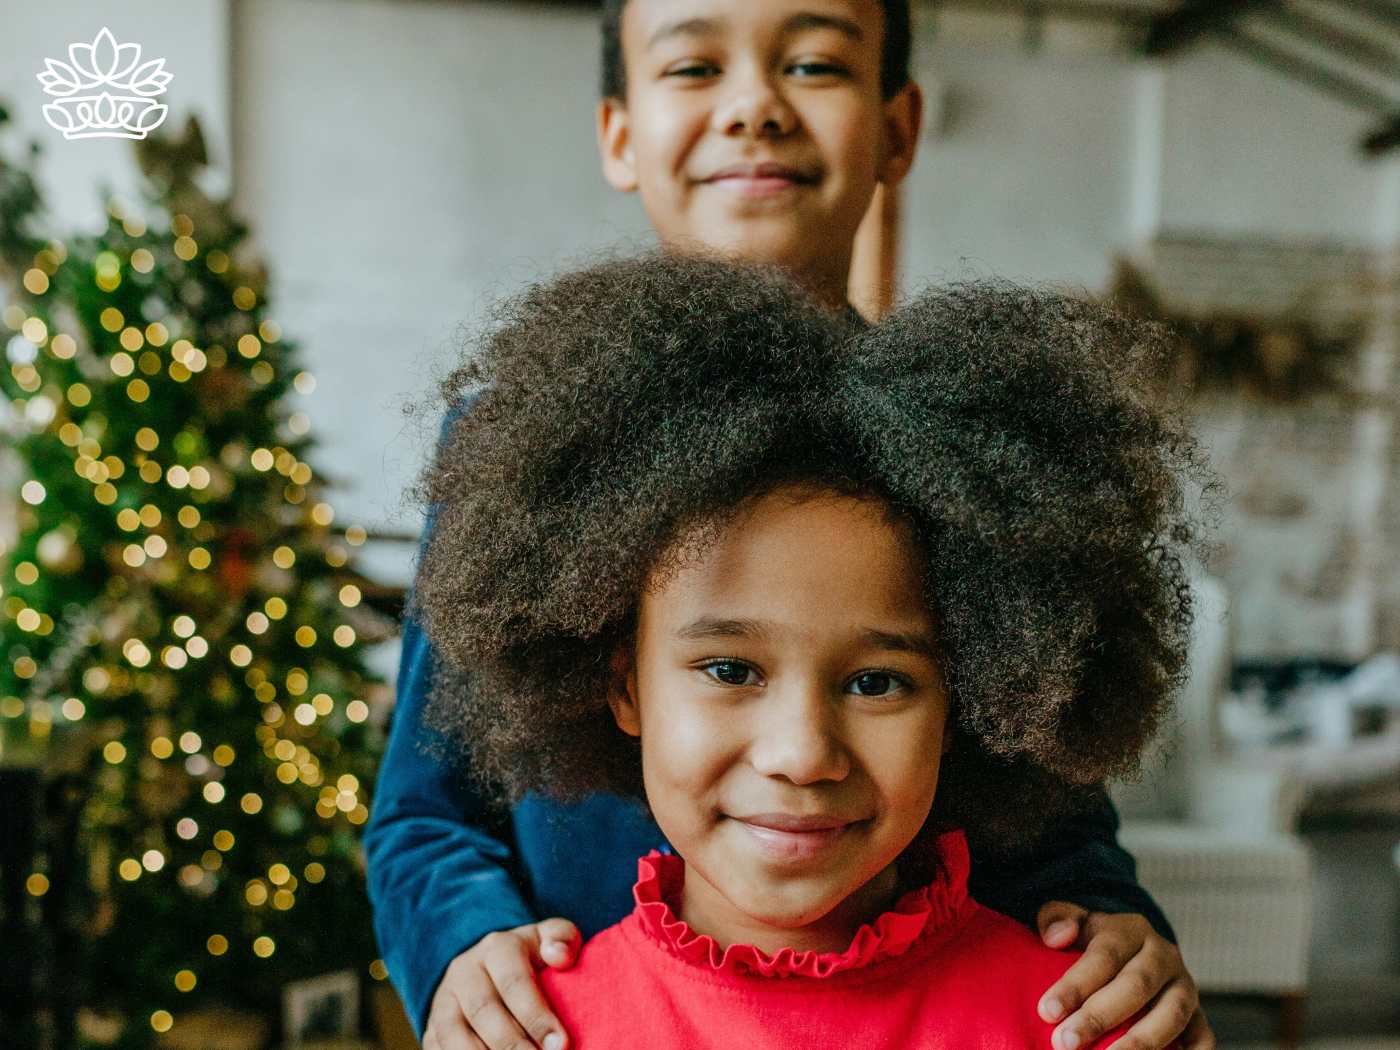 Joyful siblings with a sparkling Christmas tree in the background, capturing the essence of family festivities, from Fabulous Flowers and Gifts.